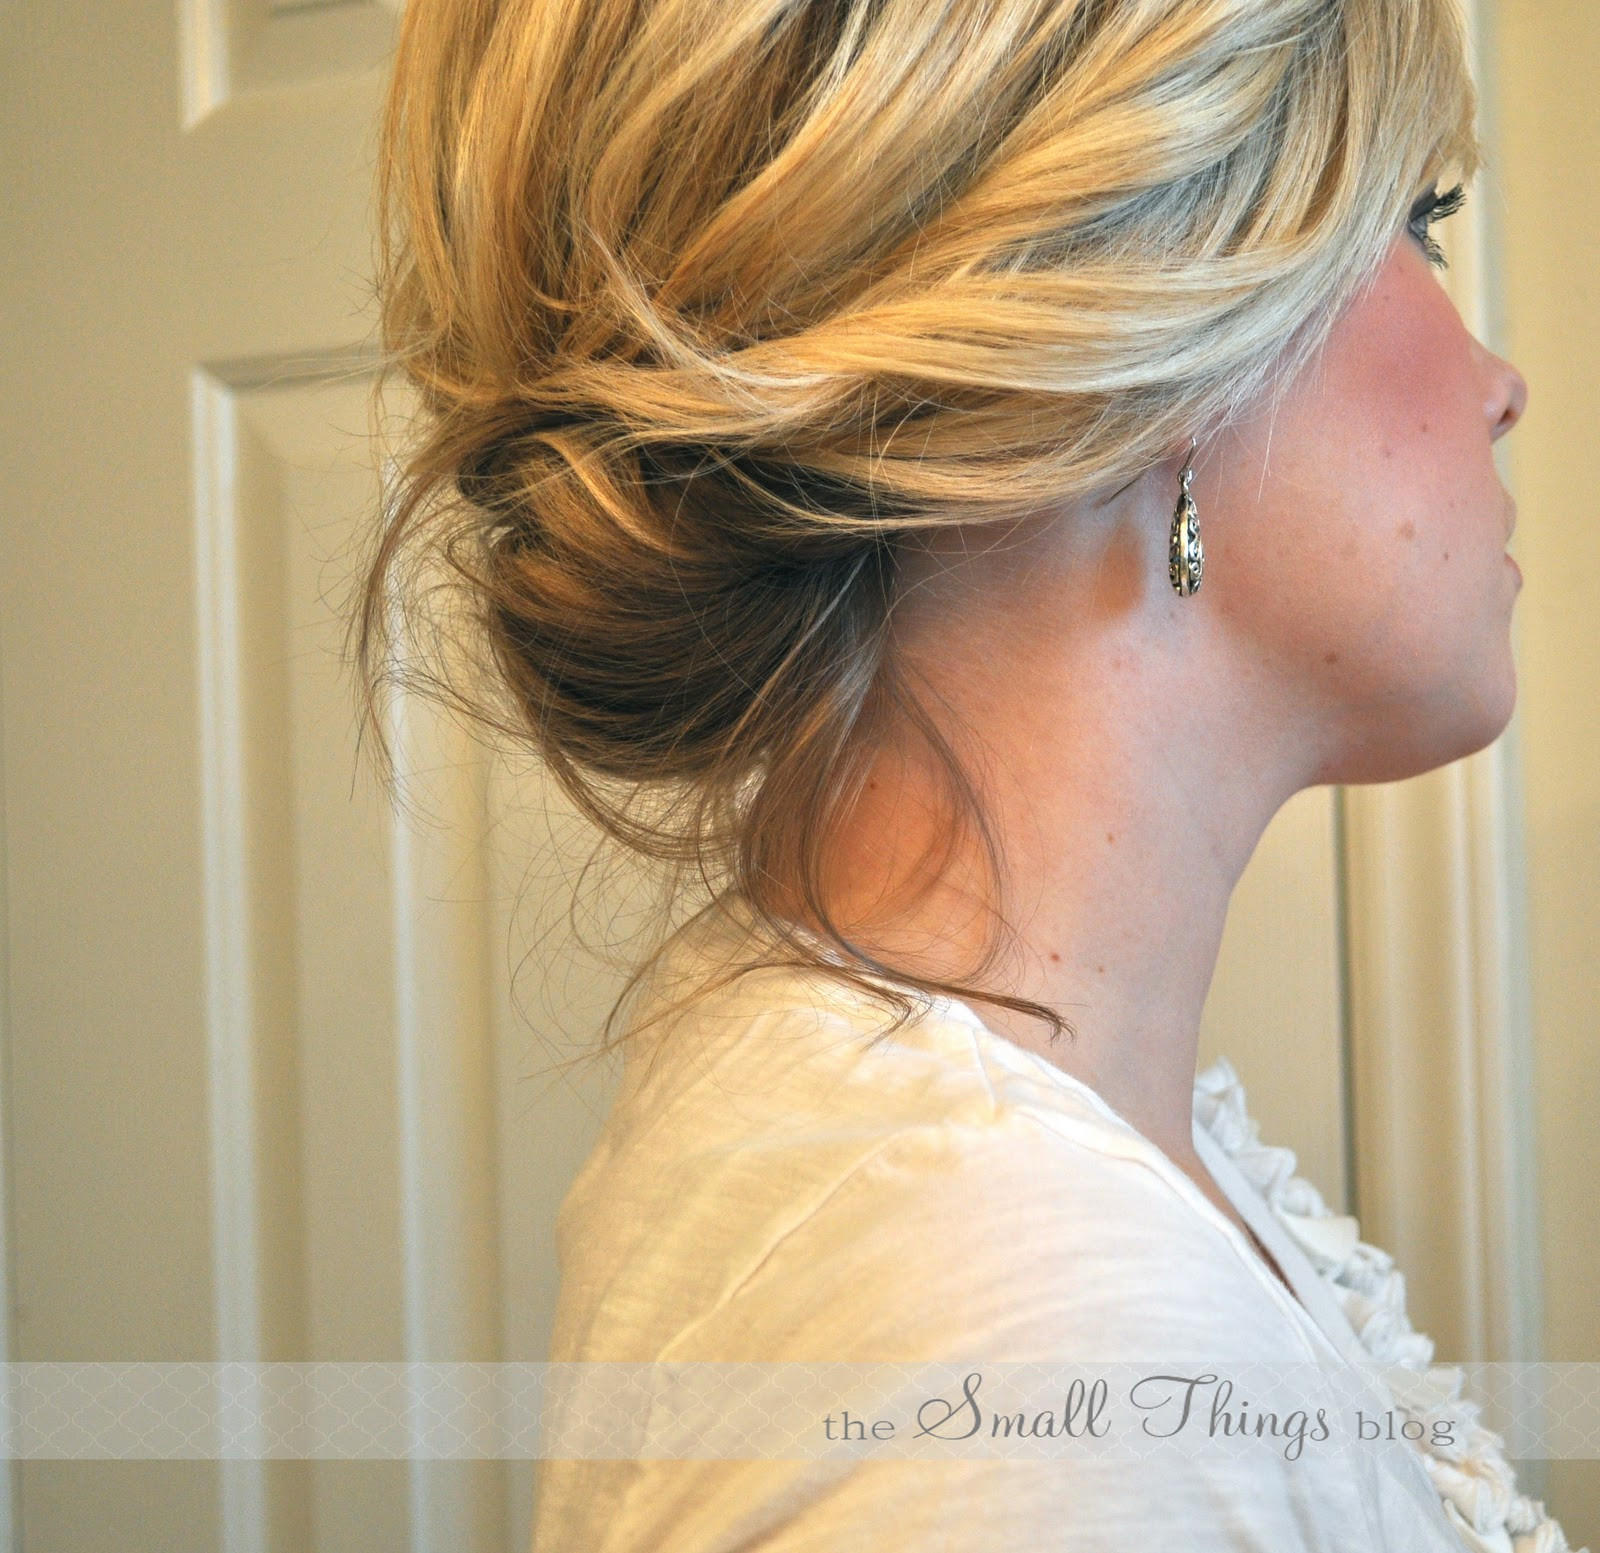 DIY Updos For Thin Hair
 The Chic Updo – The Small Things Blog